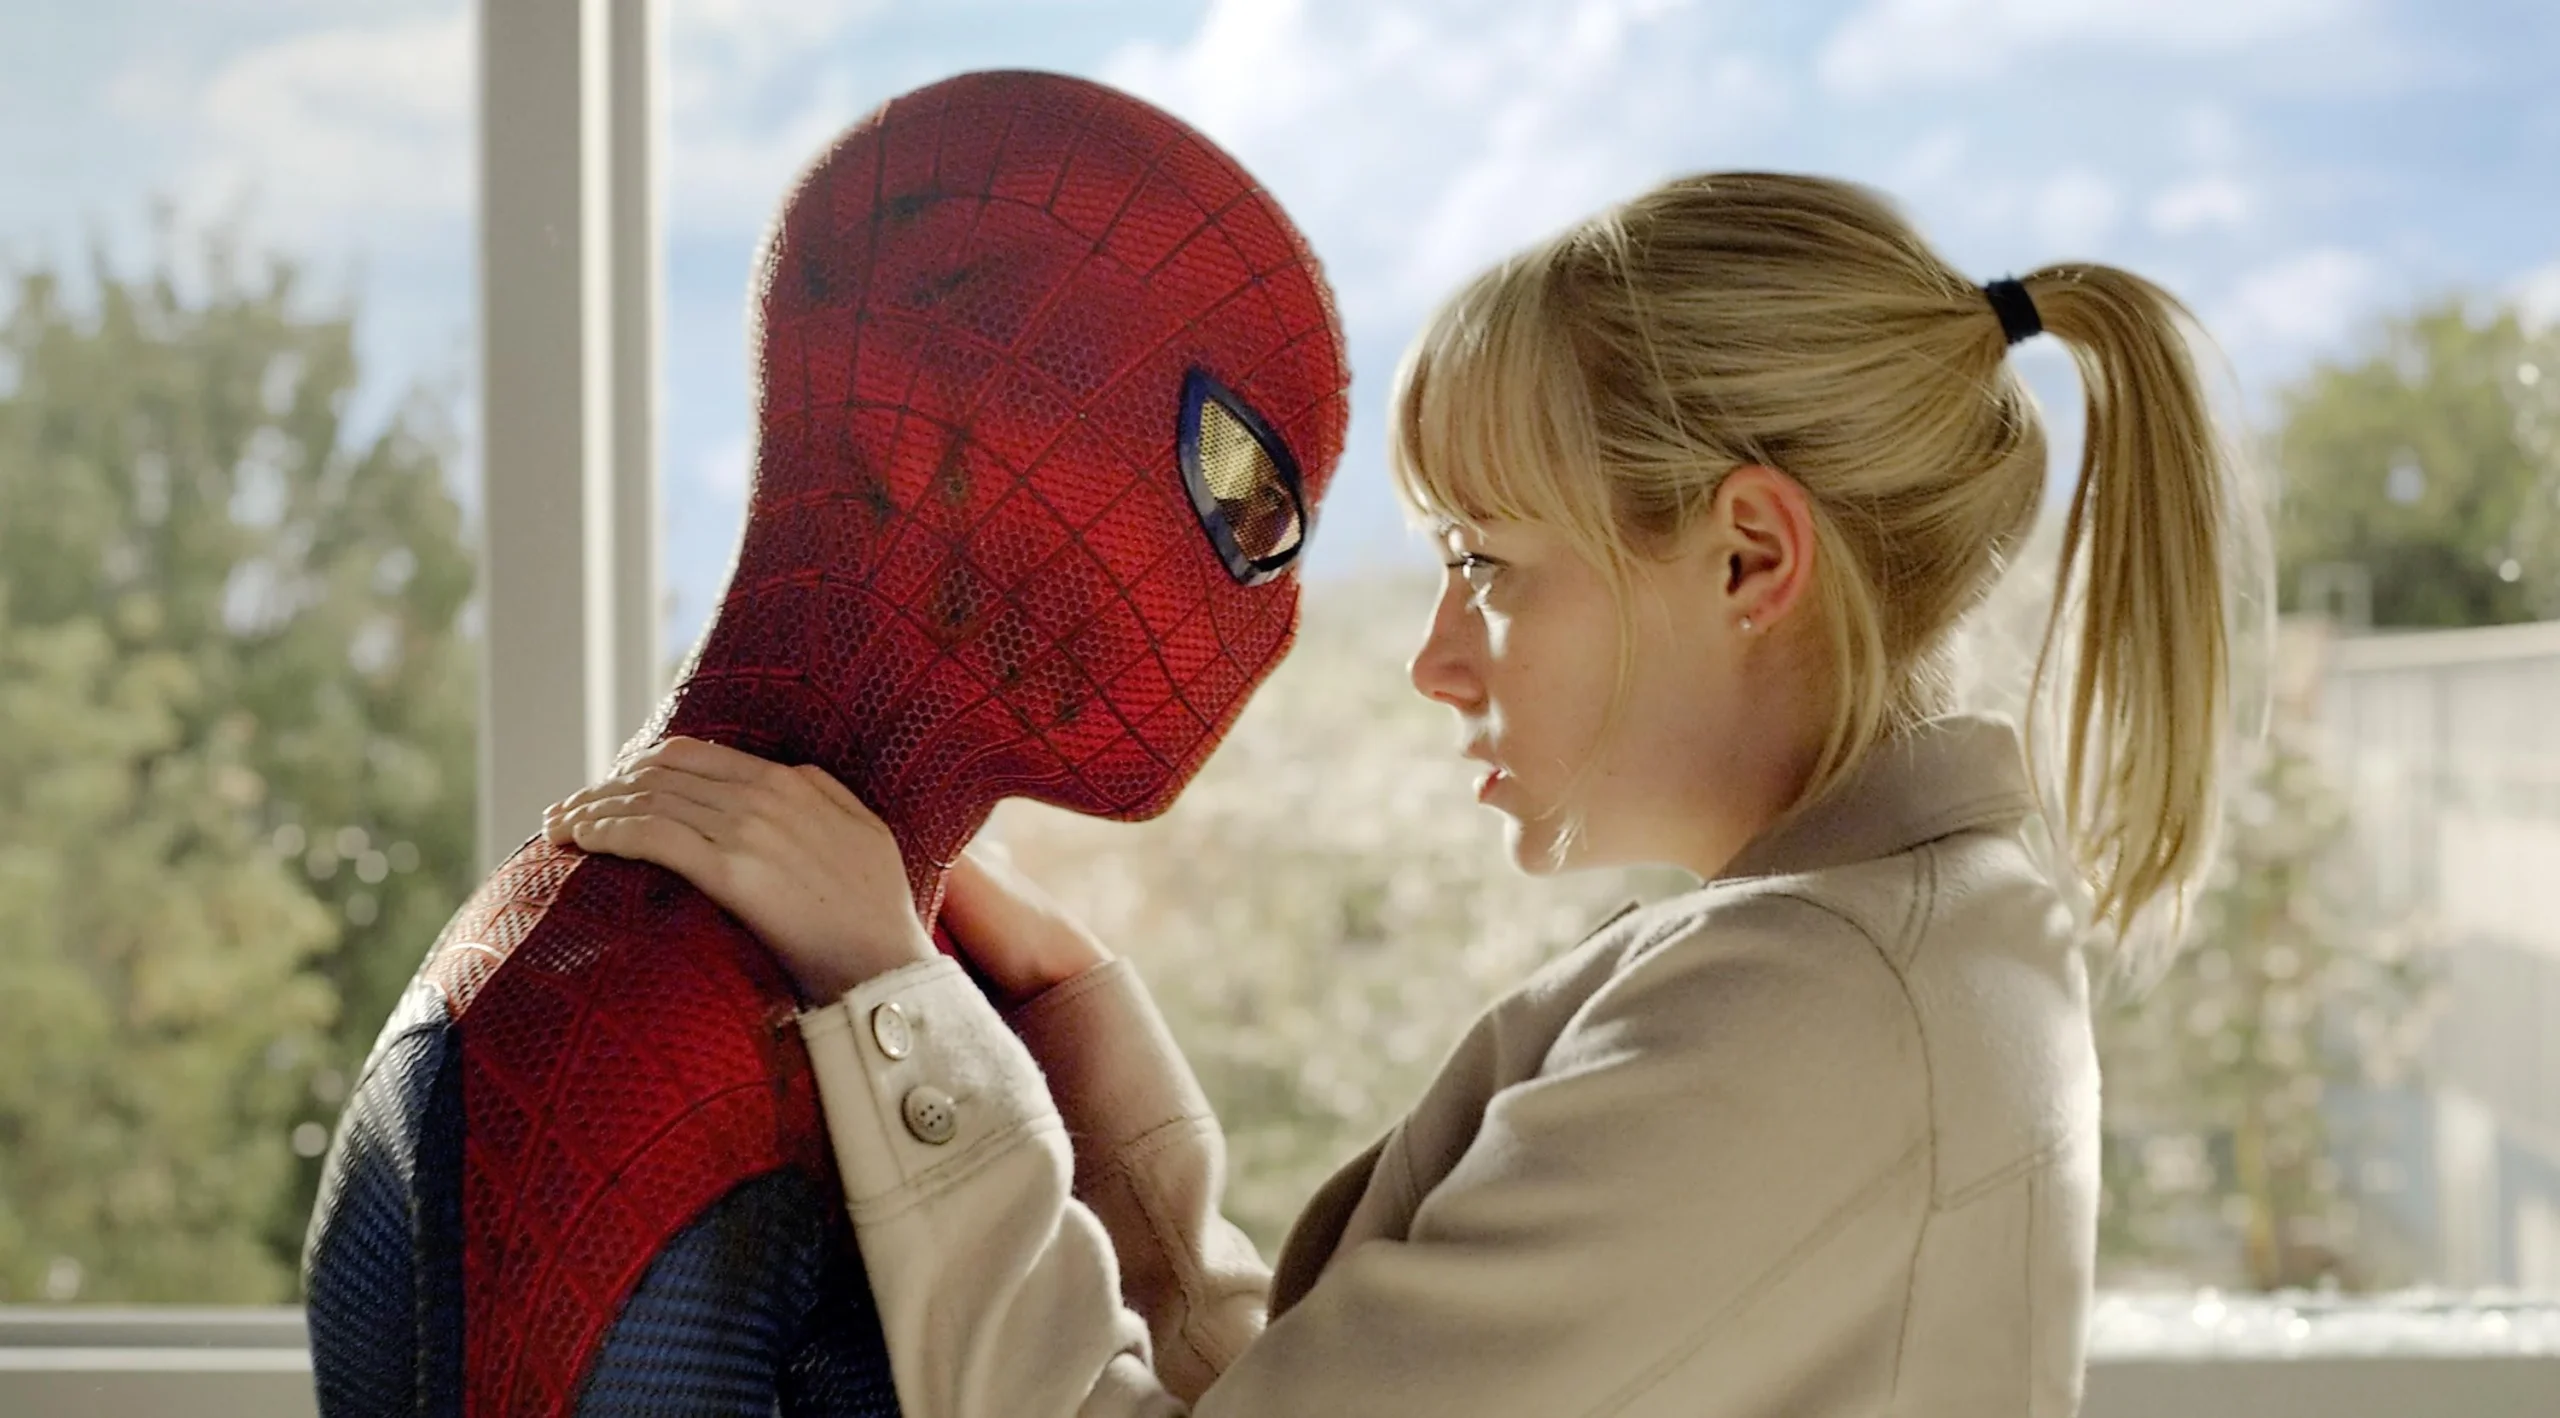 Andrew Garfield's Spider-Man and Emma Stone's Gwen Stacy in The Amazing Spider-Man films